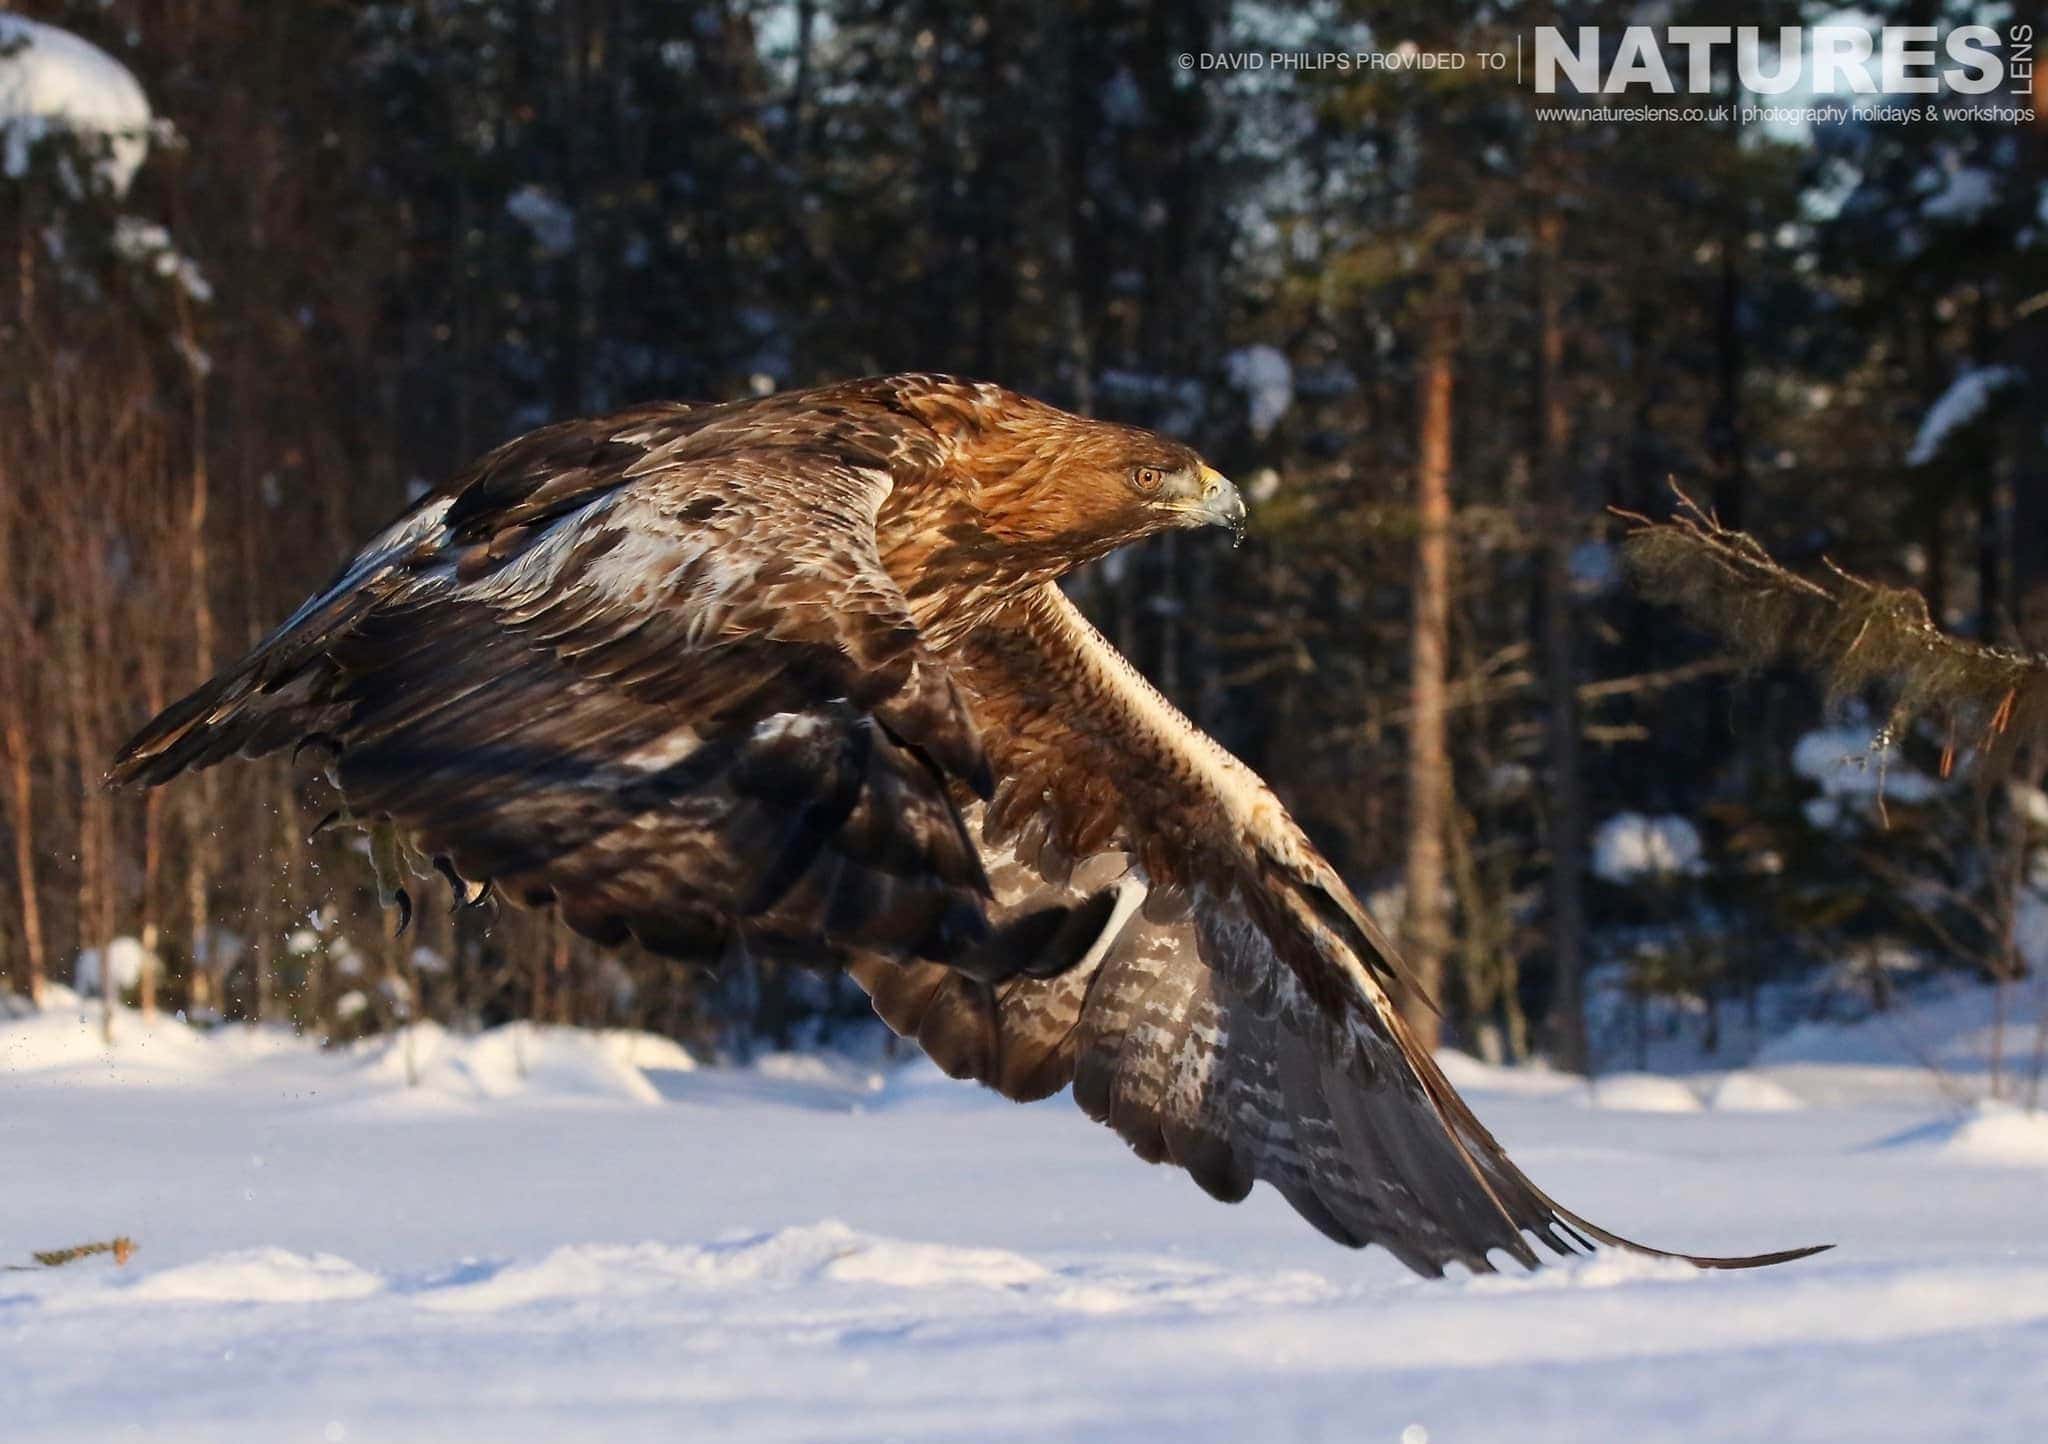 Flying In Beautiful Light One Of The Golden Eagles Takes To The Air Image Captured During The Natureslens Golden Eagles Of The Swedish Winter Photography Holiday